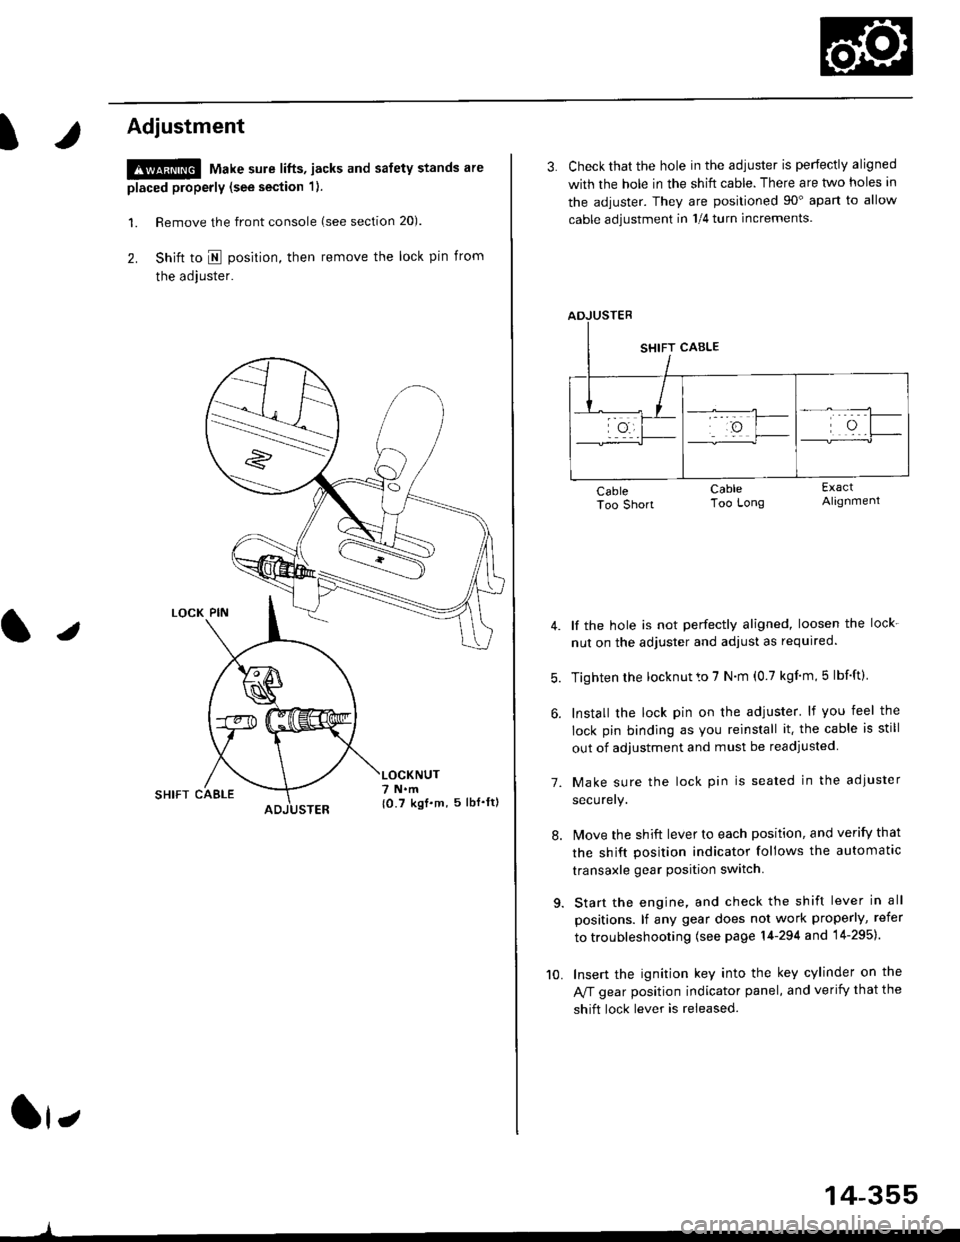 HONDA CIVIC 1996 6.G Workshop Manual t
Adjustment
!@ Make sure lifts, jacks and safety stands are
placed properly (see section 1).
l. Remove the front console (see section 20).
2. Shift to I posirion, then remove the lock pin from
the ad